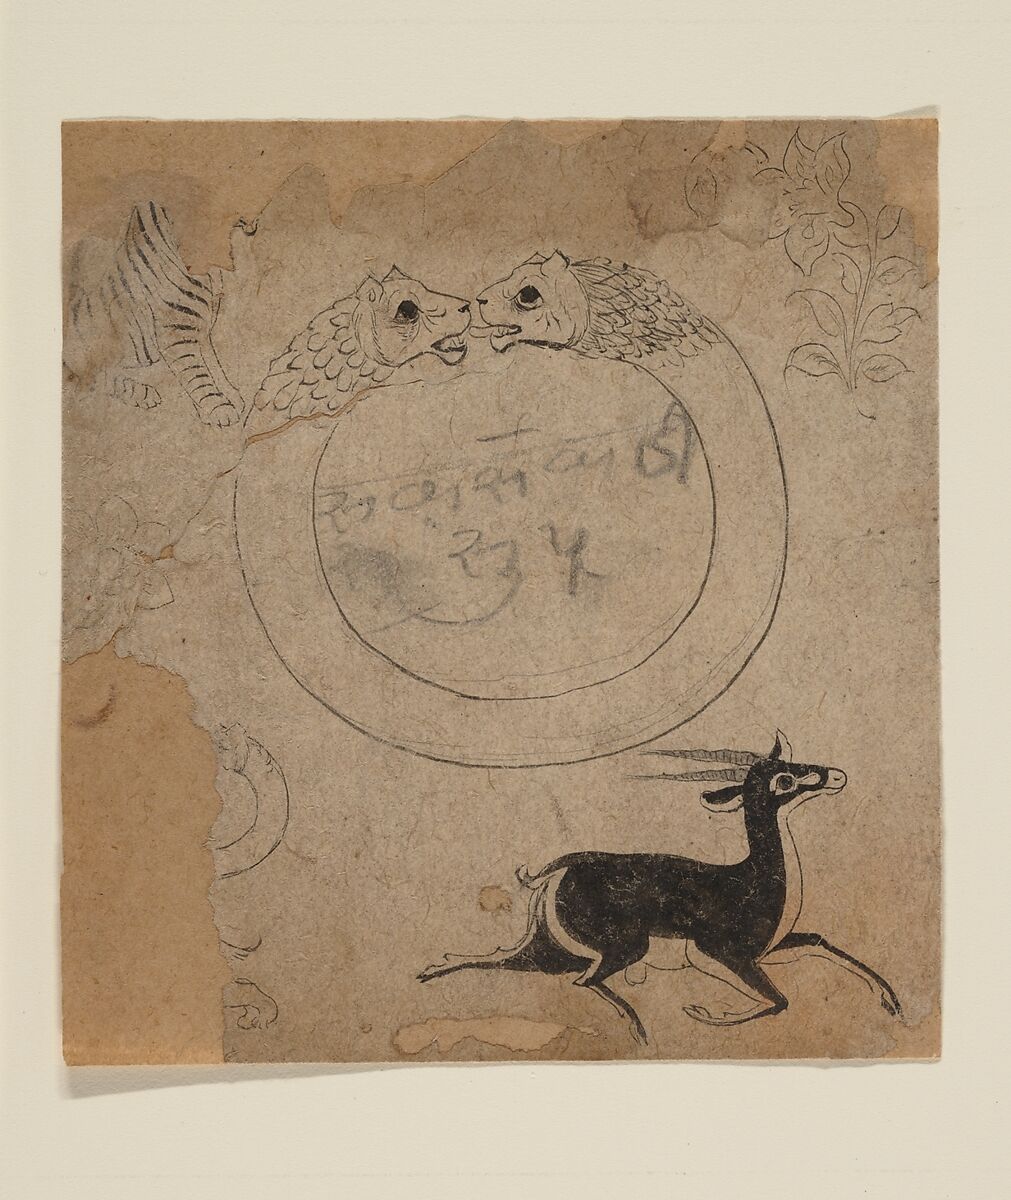 Design for a Bangle, Ink and translucent watercolor on paper, India (Pahari Hills) 